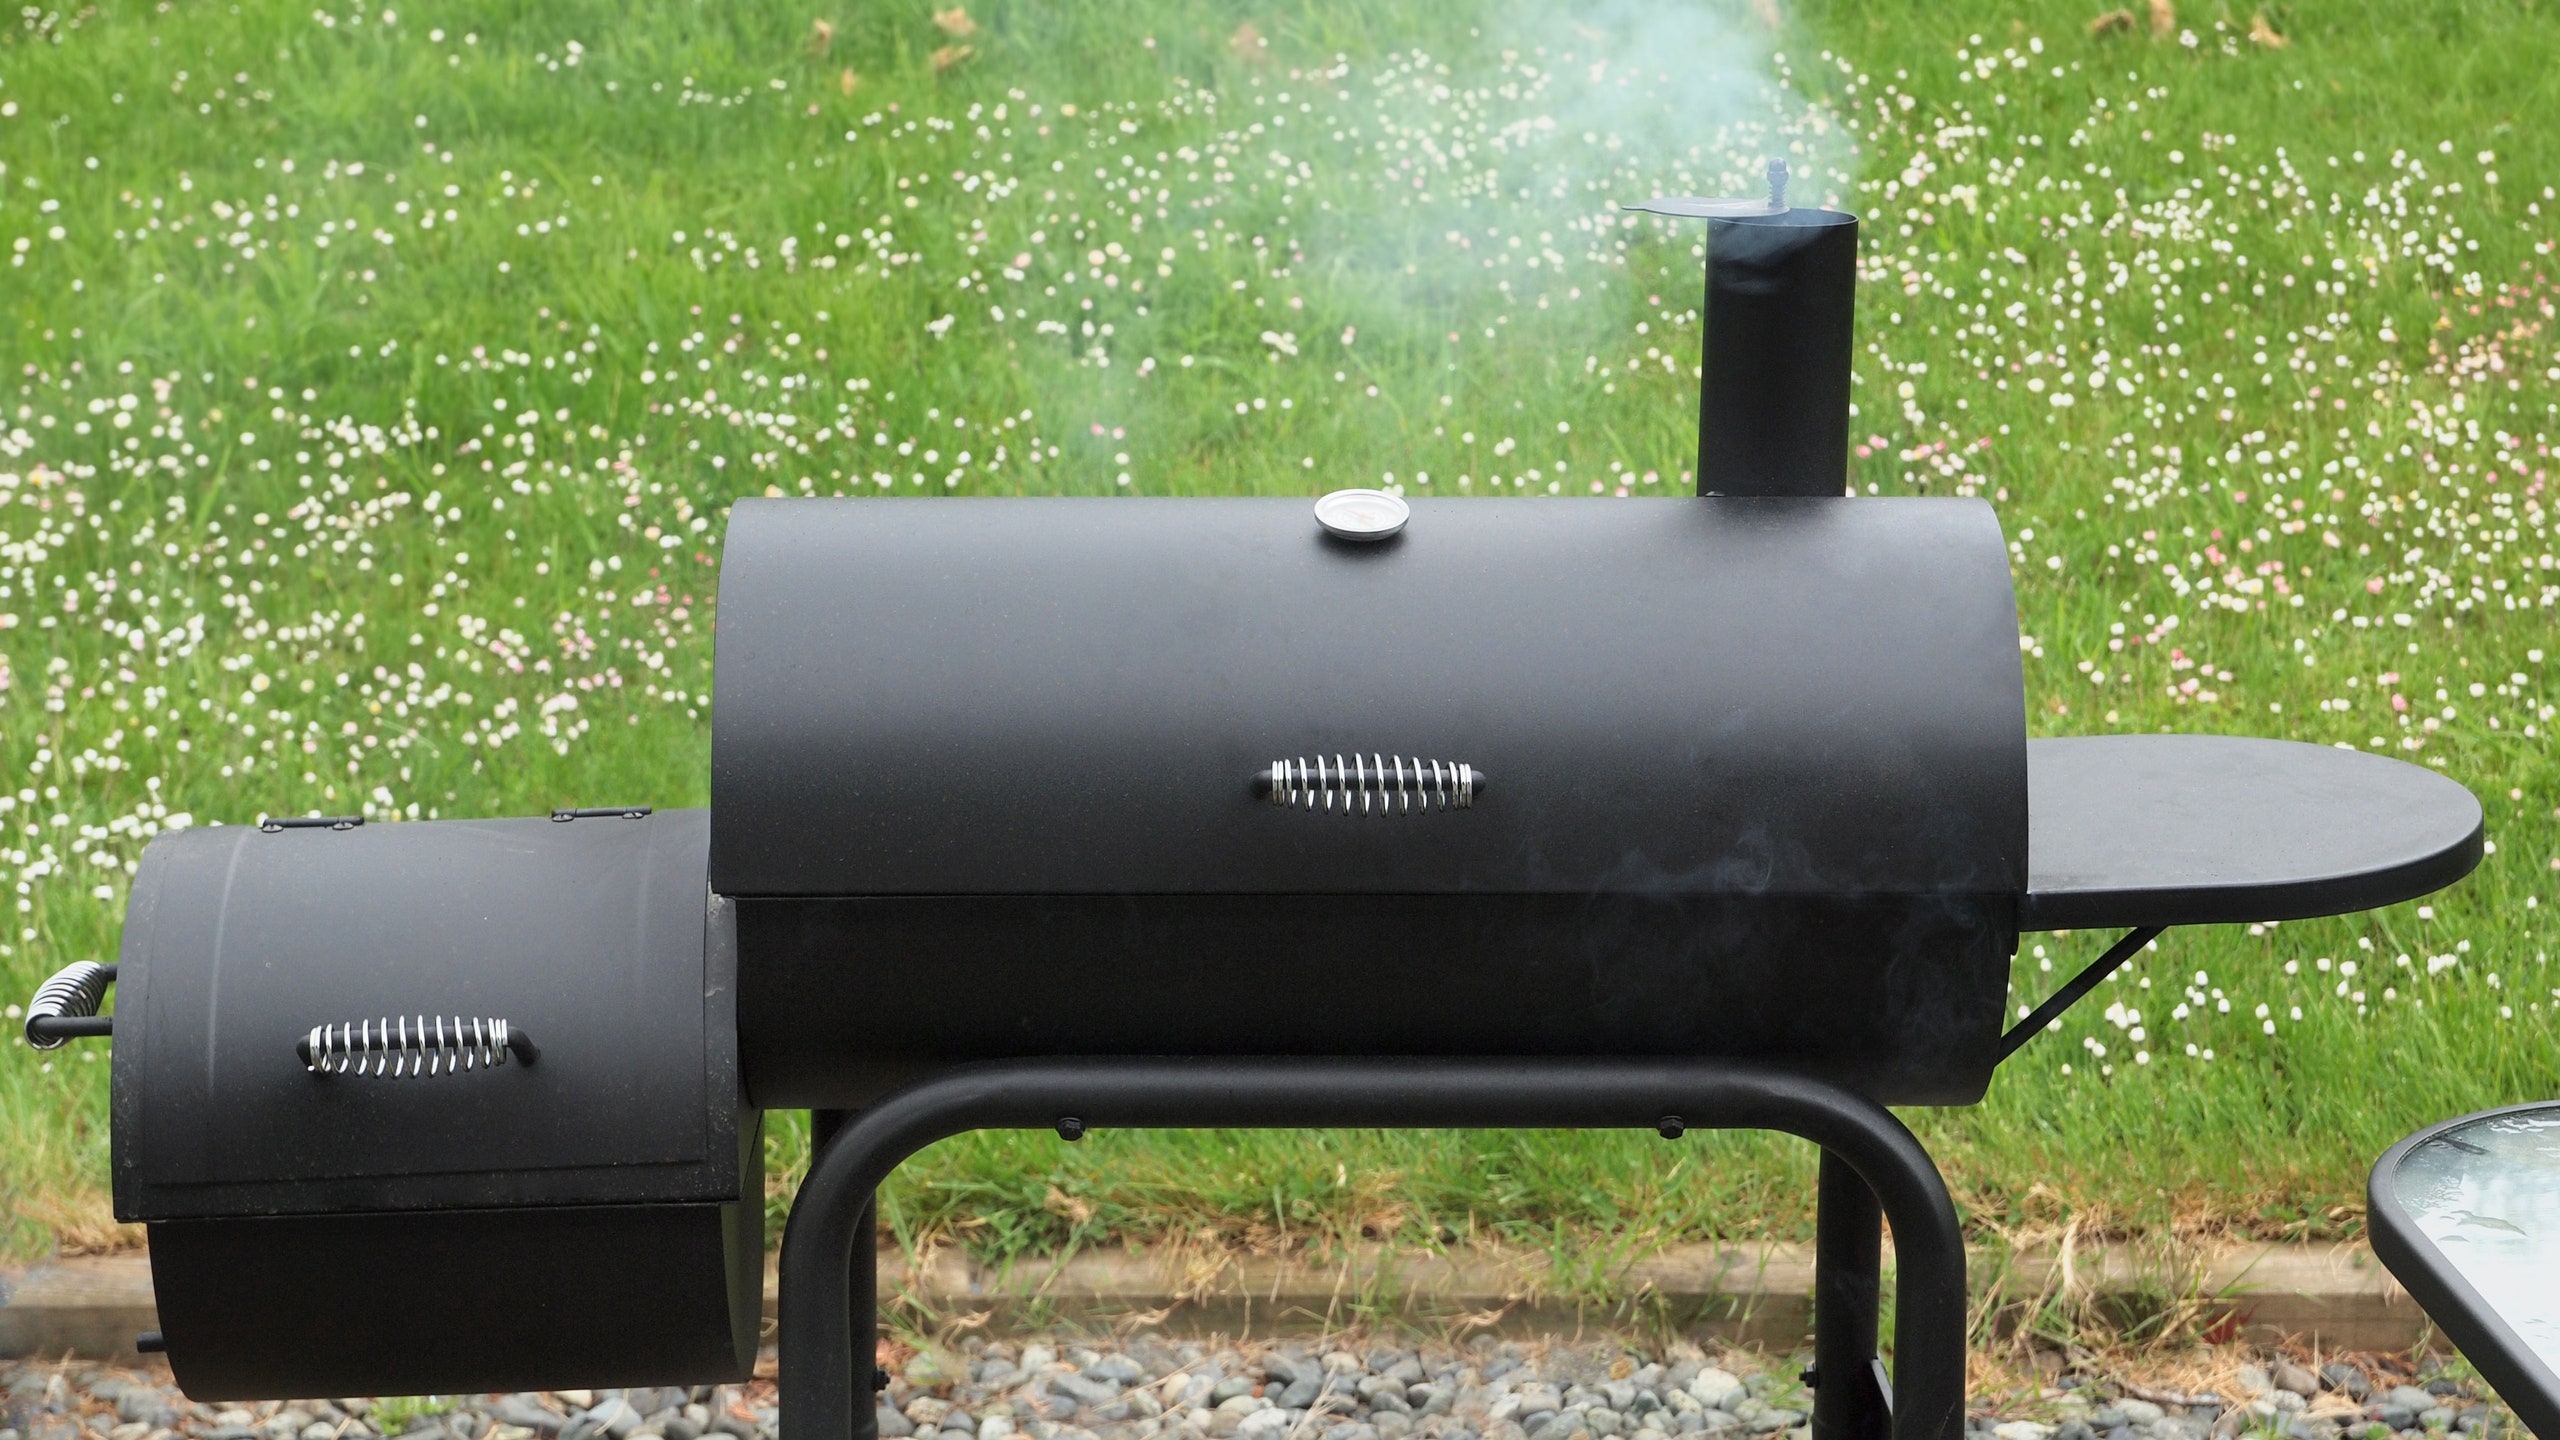 Types of Grills and Smokers: How to Buy the Right Barbecue Firebox?